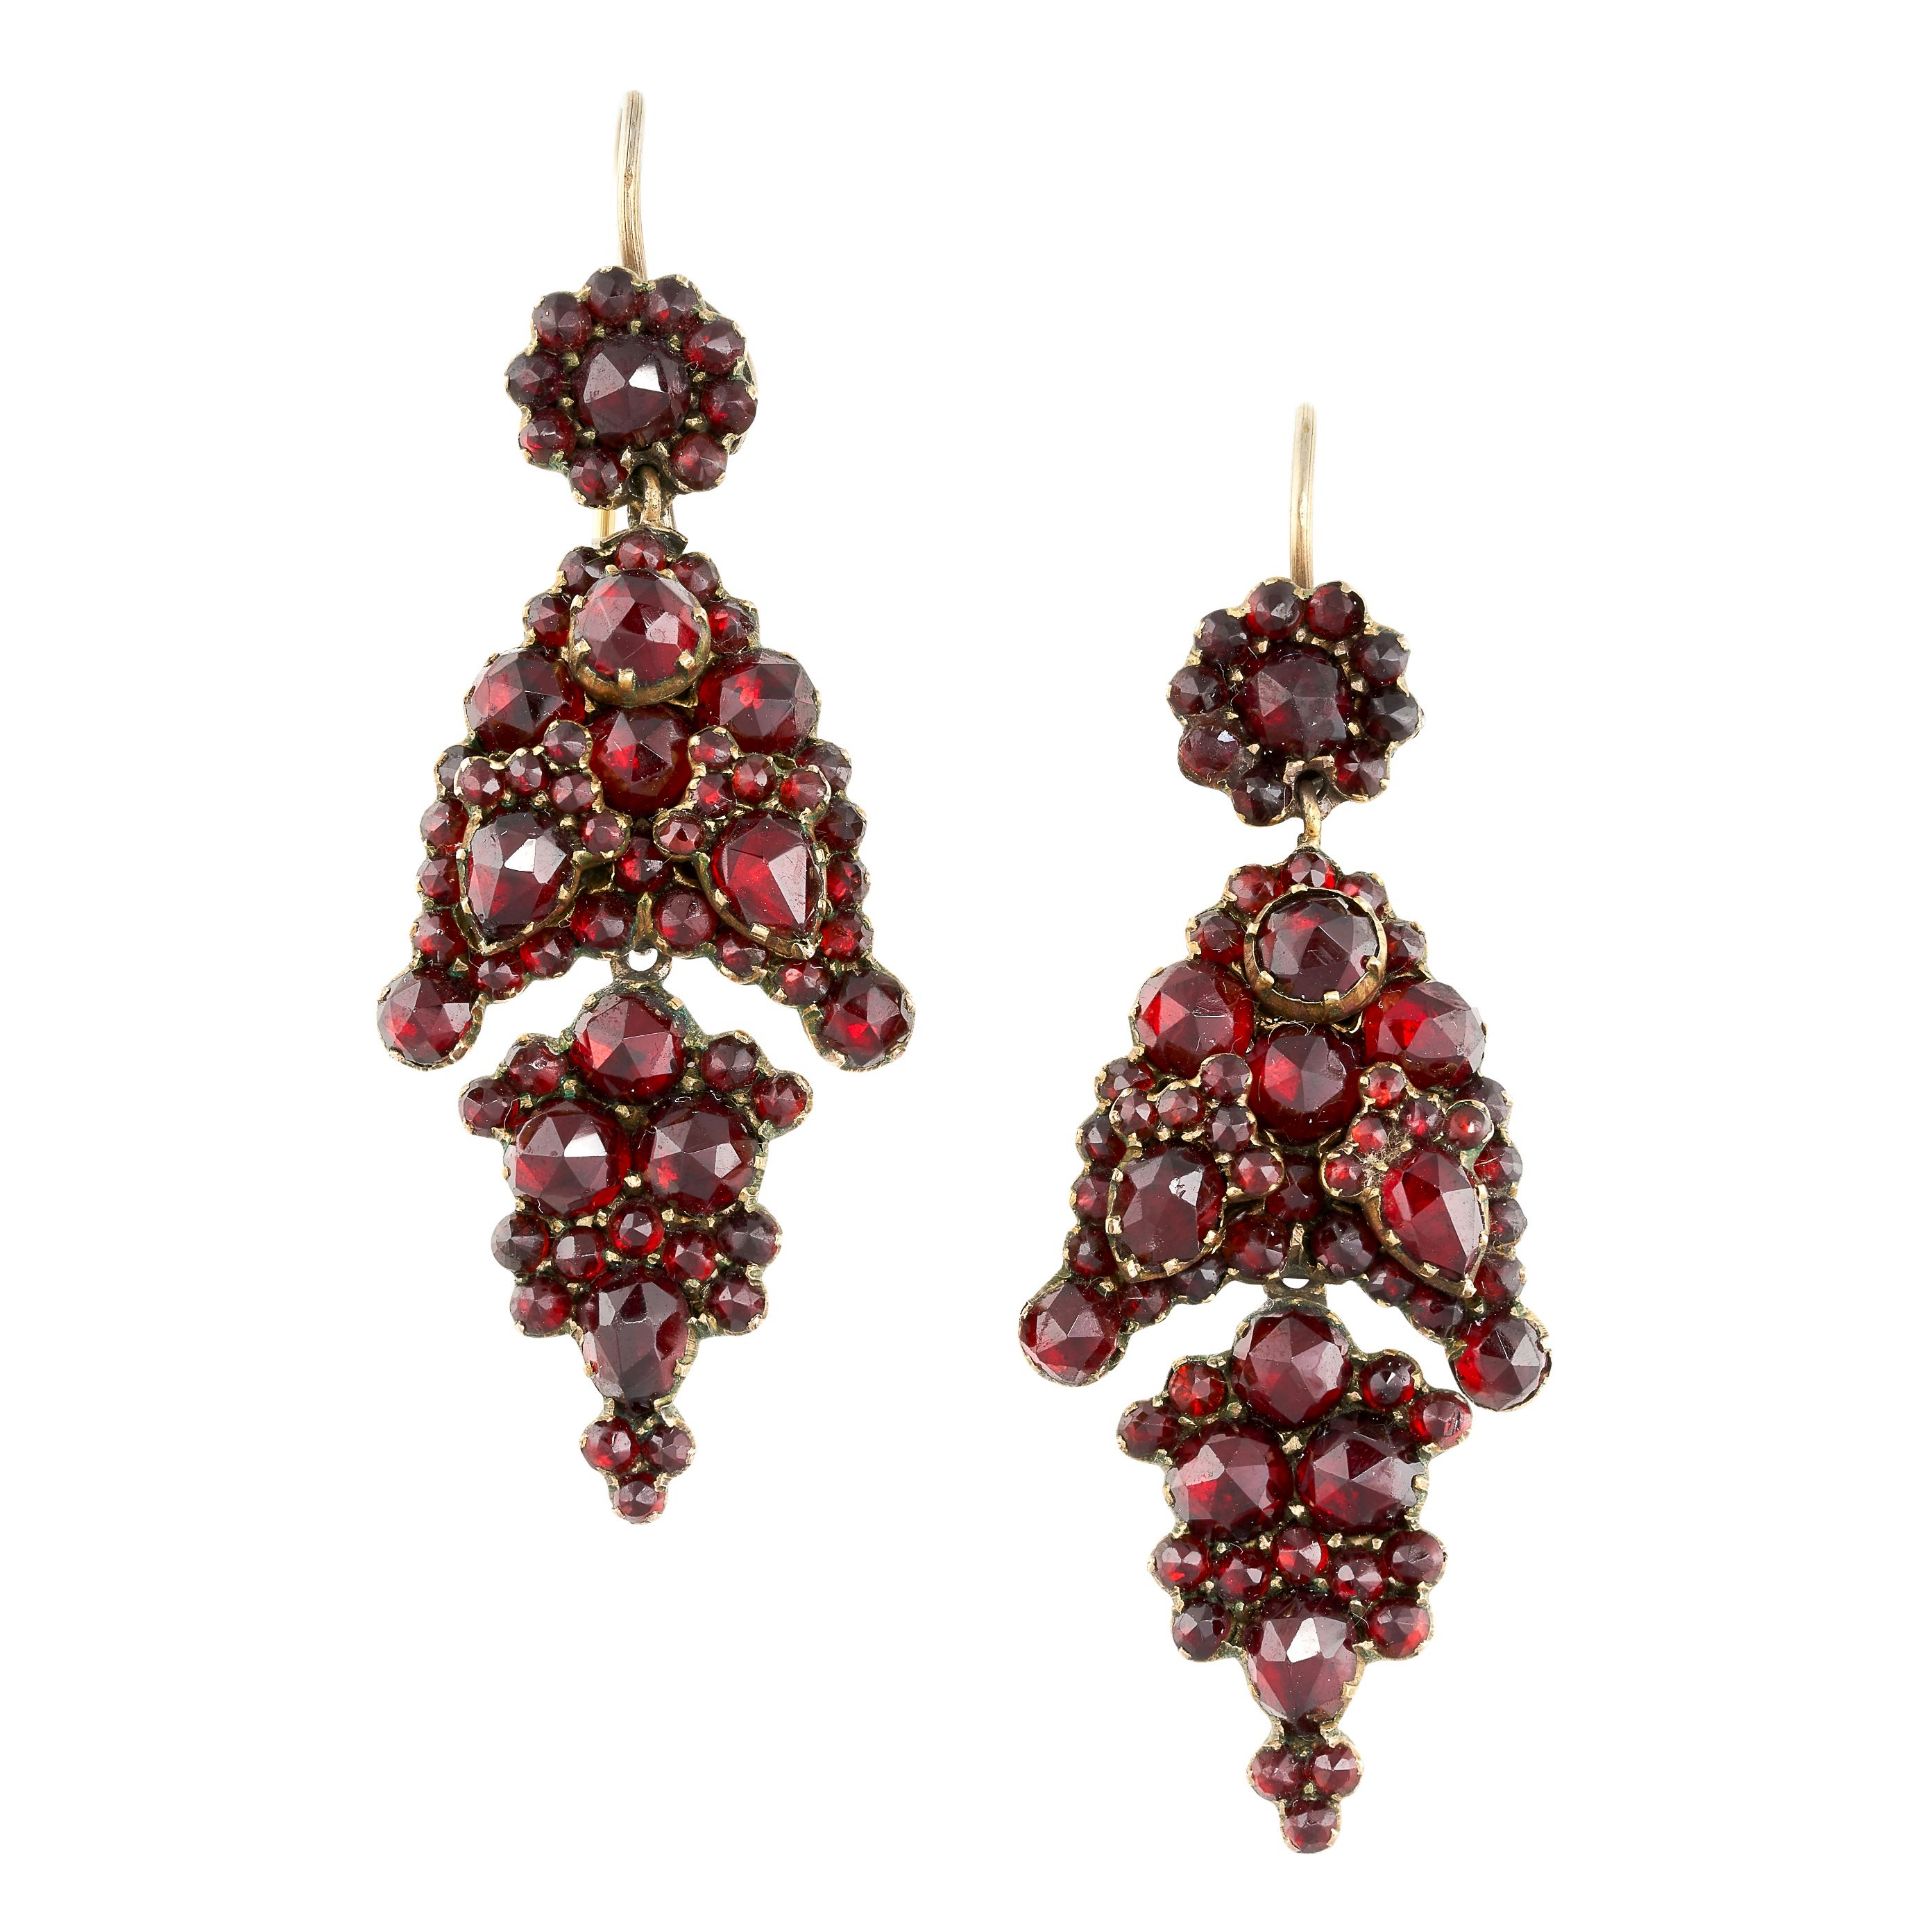 NO RESERVE - A PAIR OF ANTIQUE GARNET EARRINGS in yellow gold, the articulated bodies set throughout